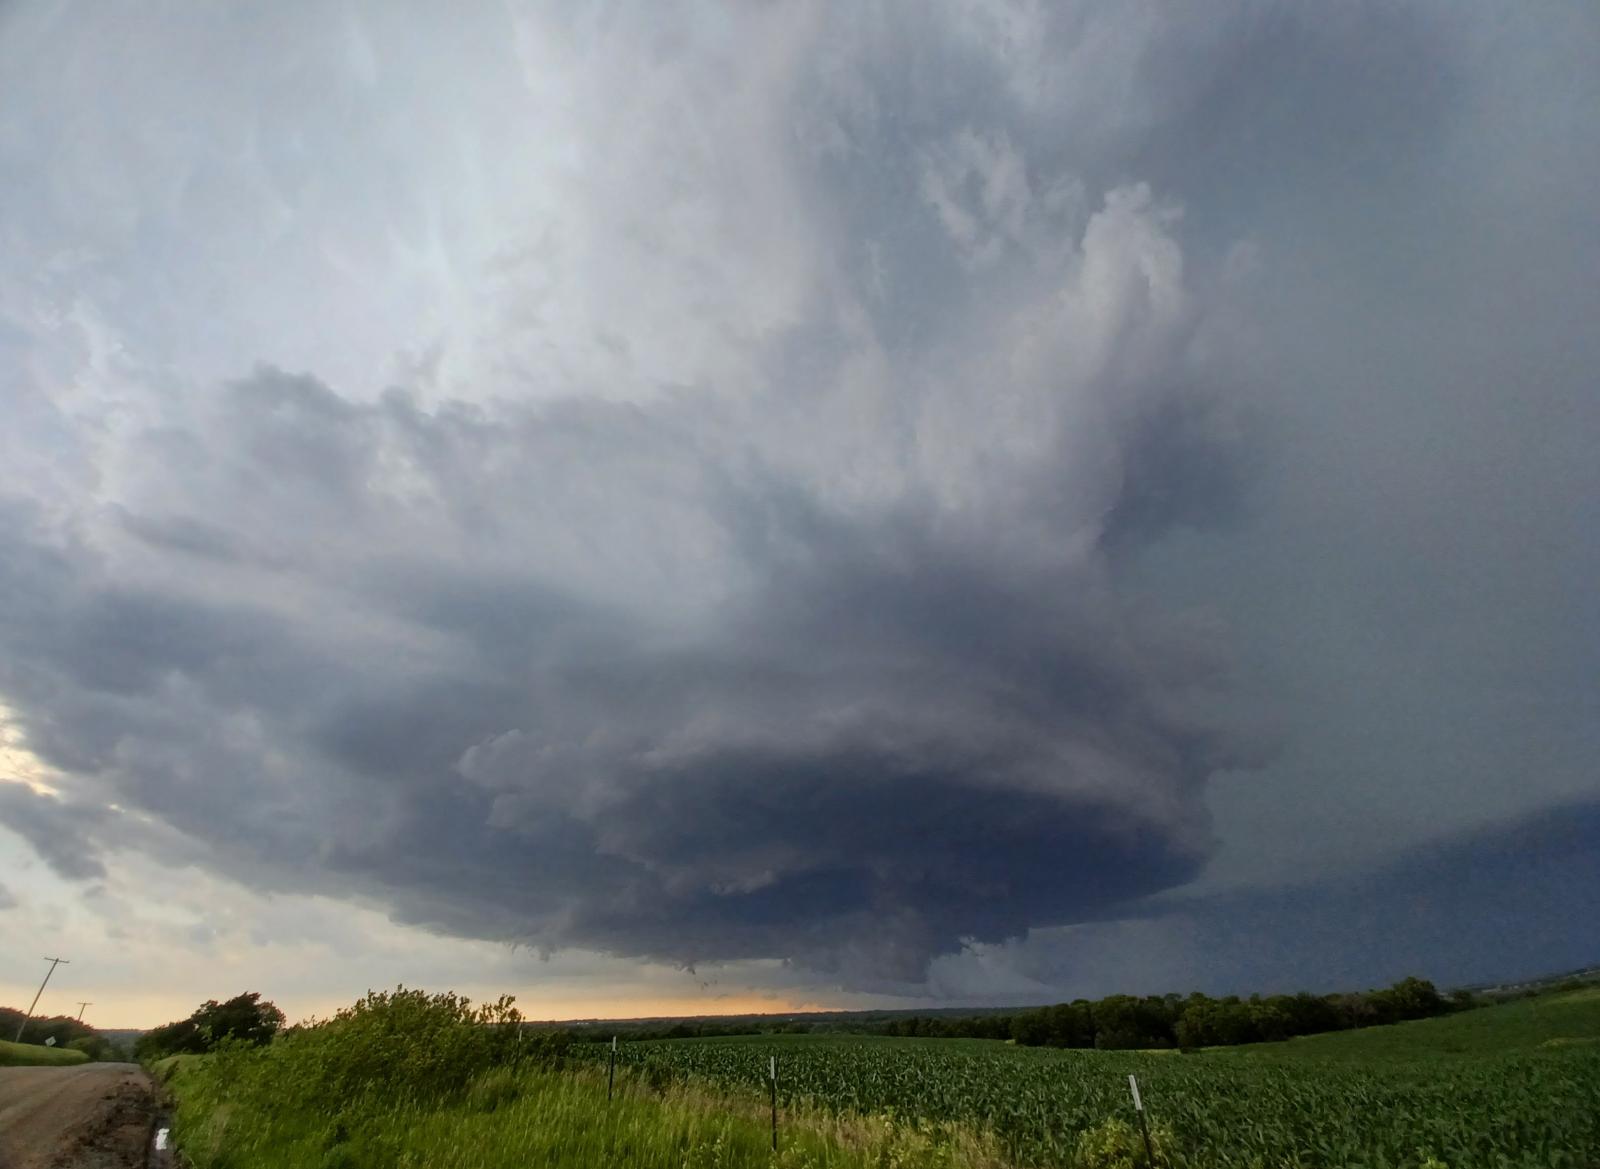 A tornadic supercell from day 1 of tour 4 on the storm chase